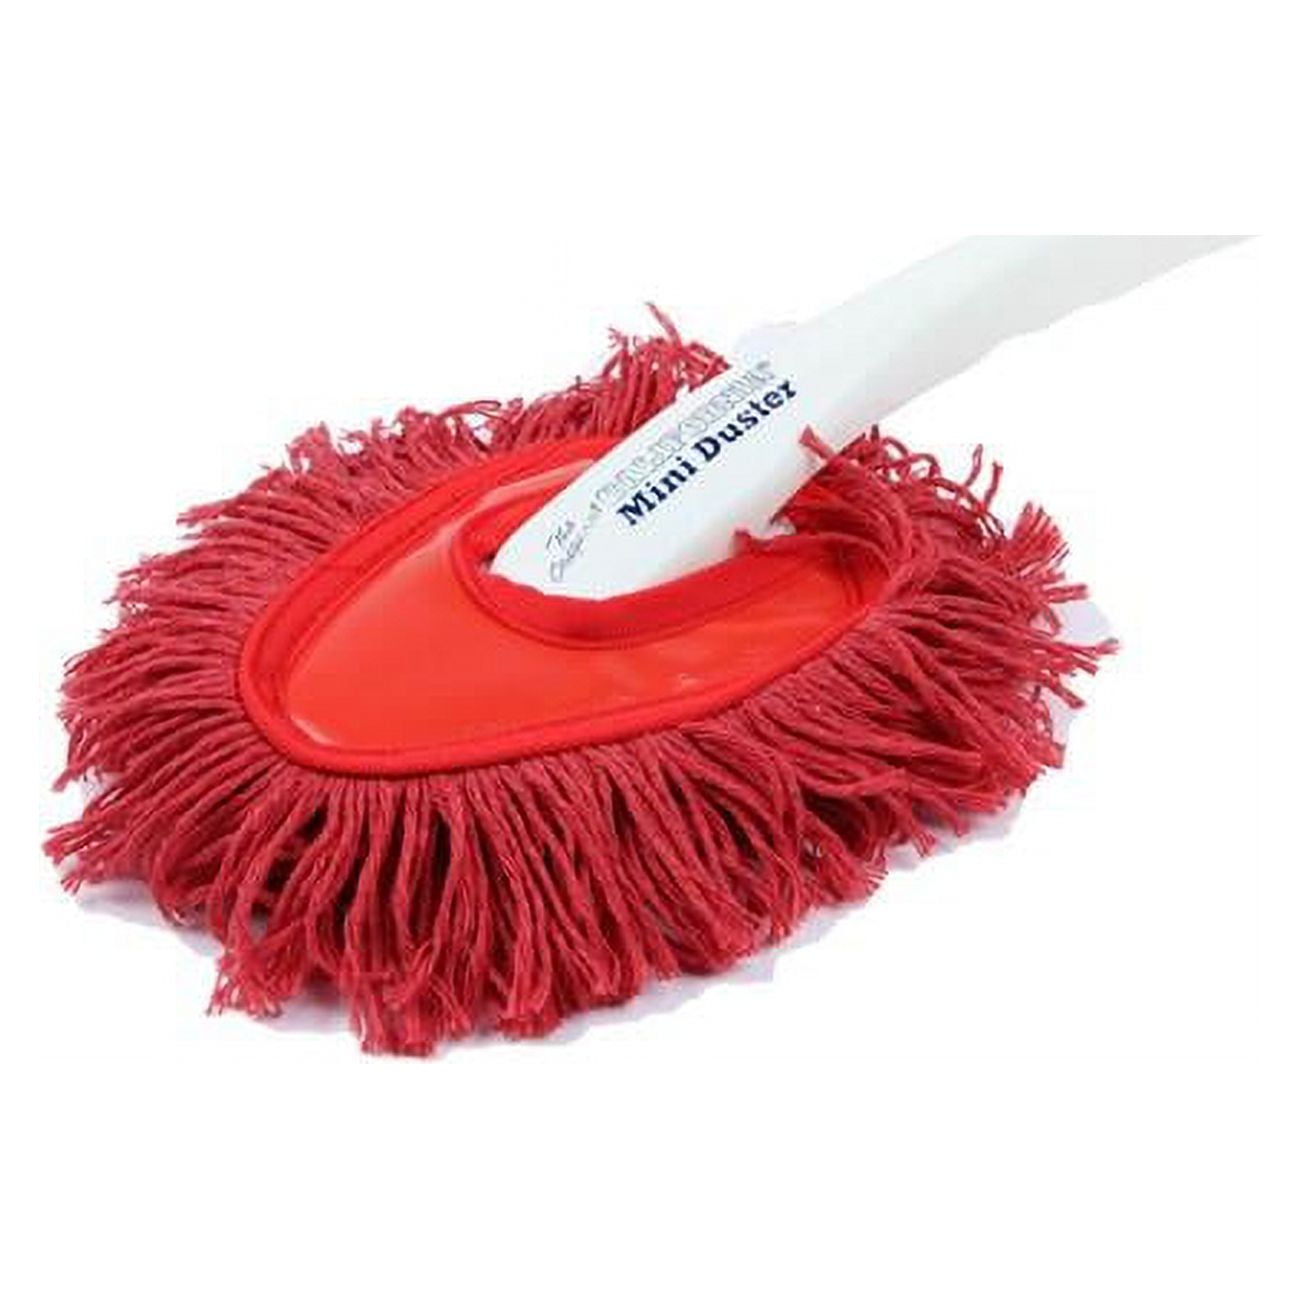 California Car Duster 62424 for sale online